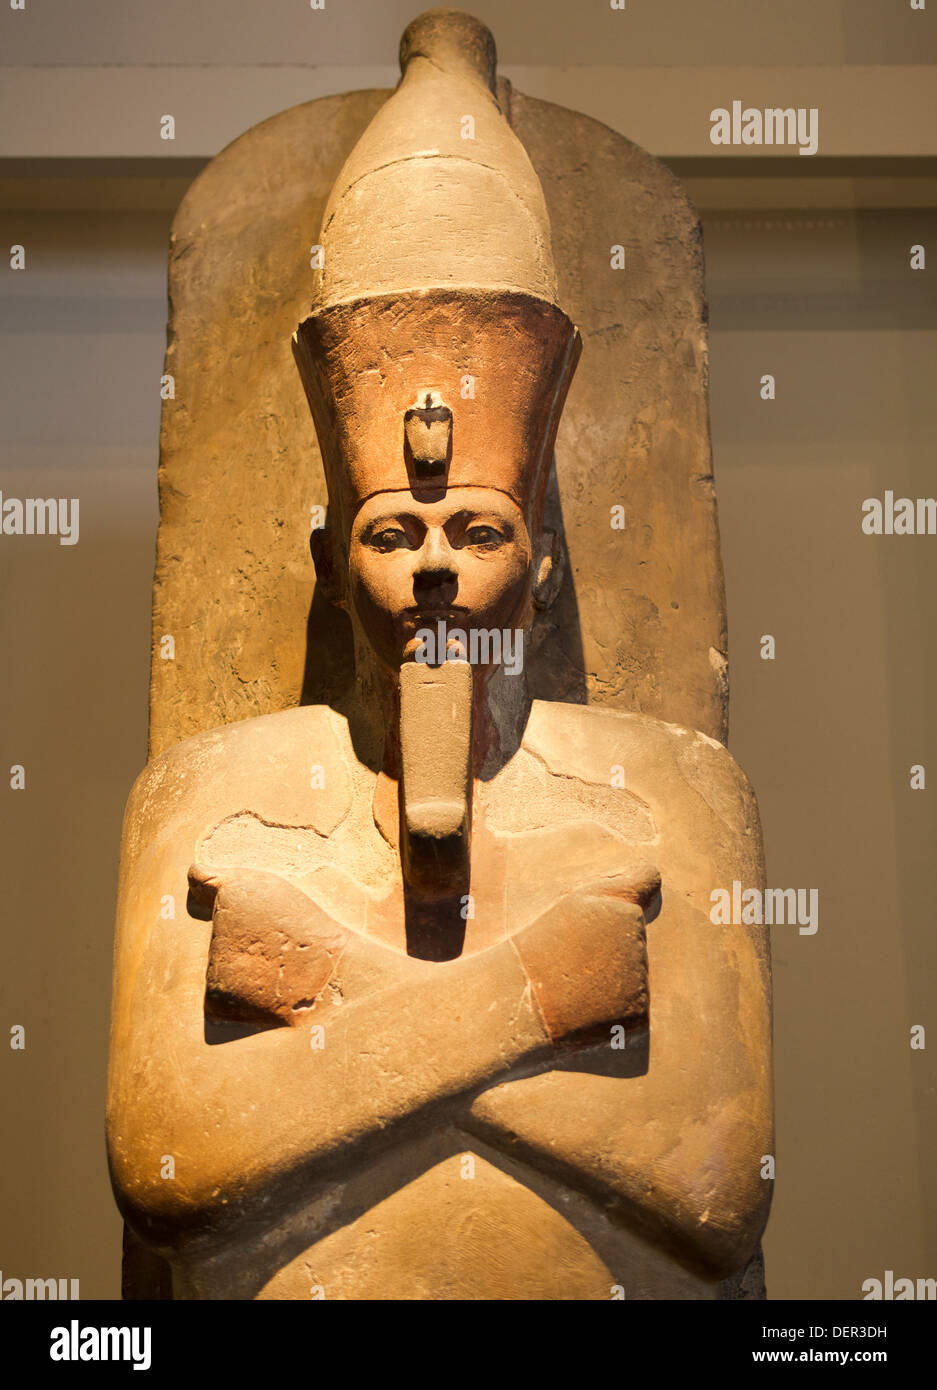 The British Museum, London - statue of Amenhotep I from Thebes Stock Photo